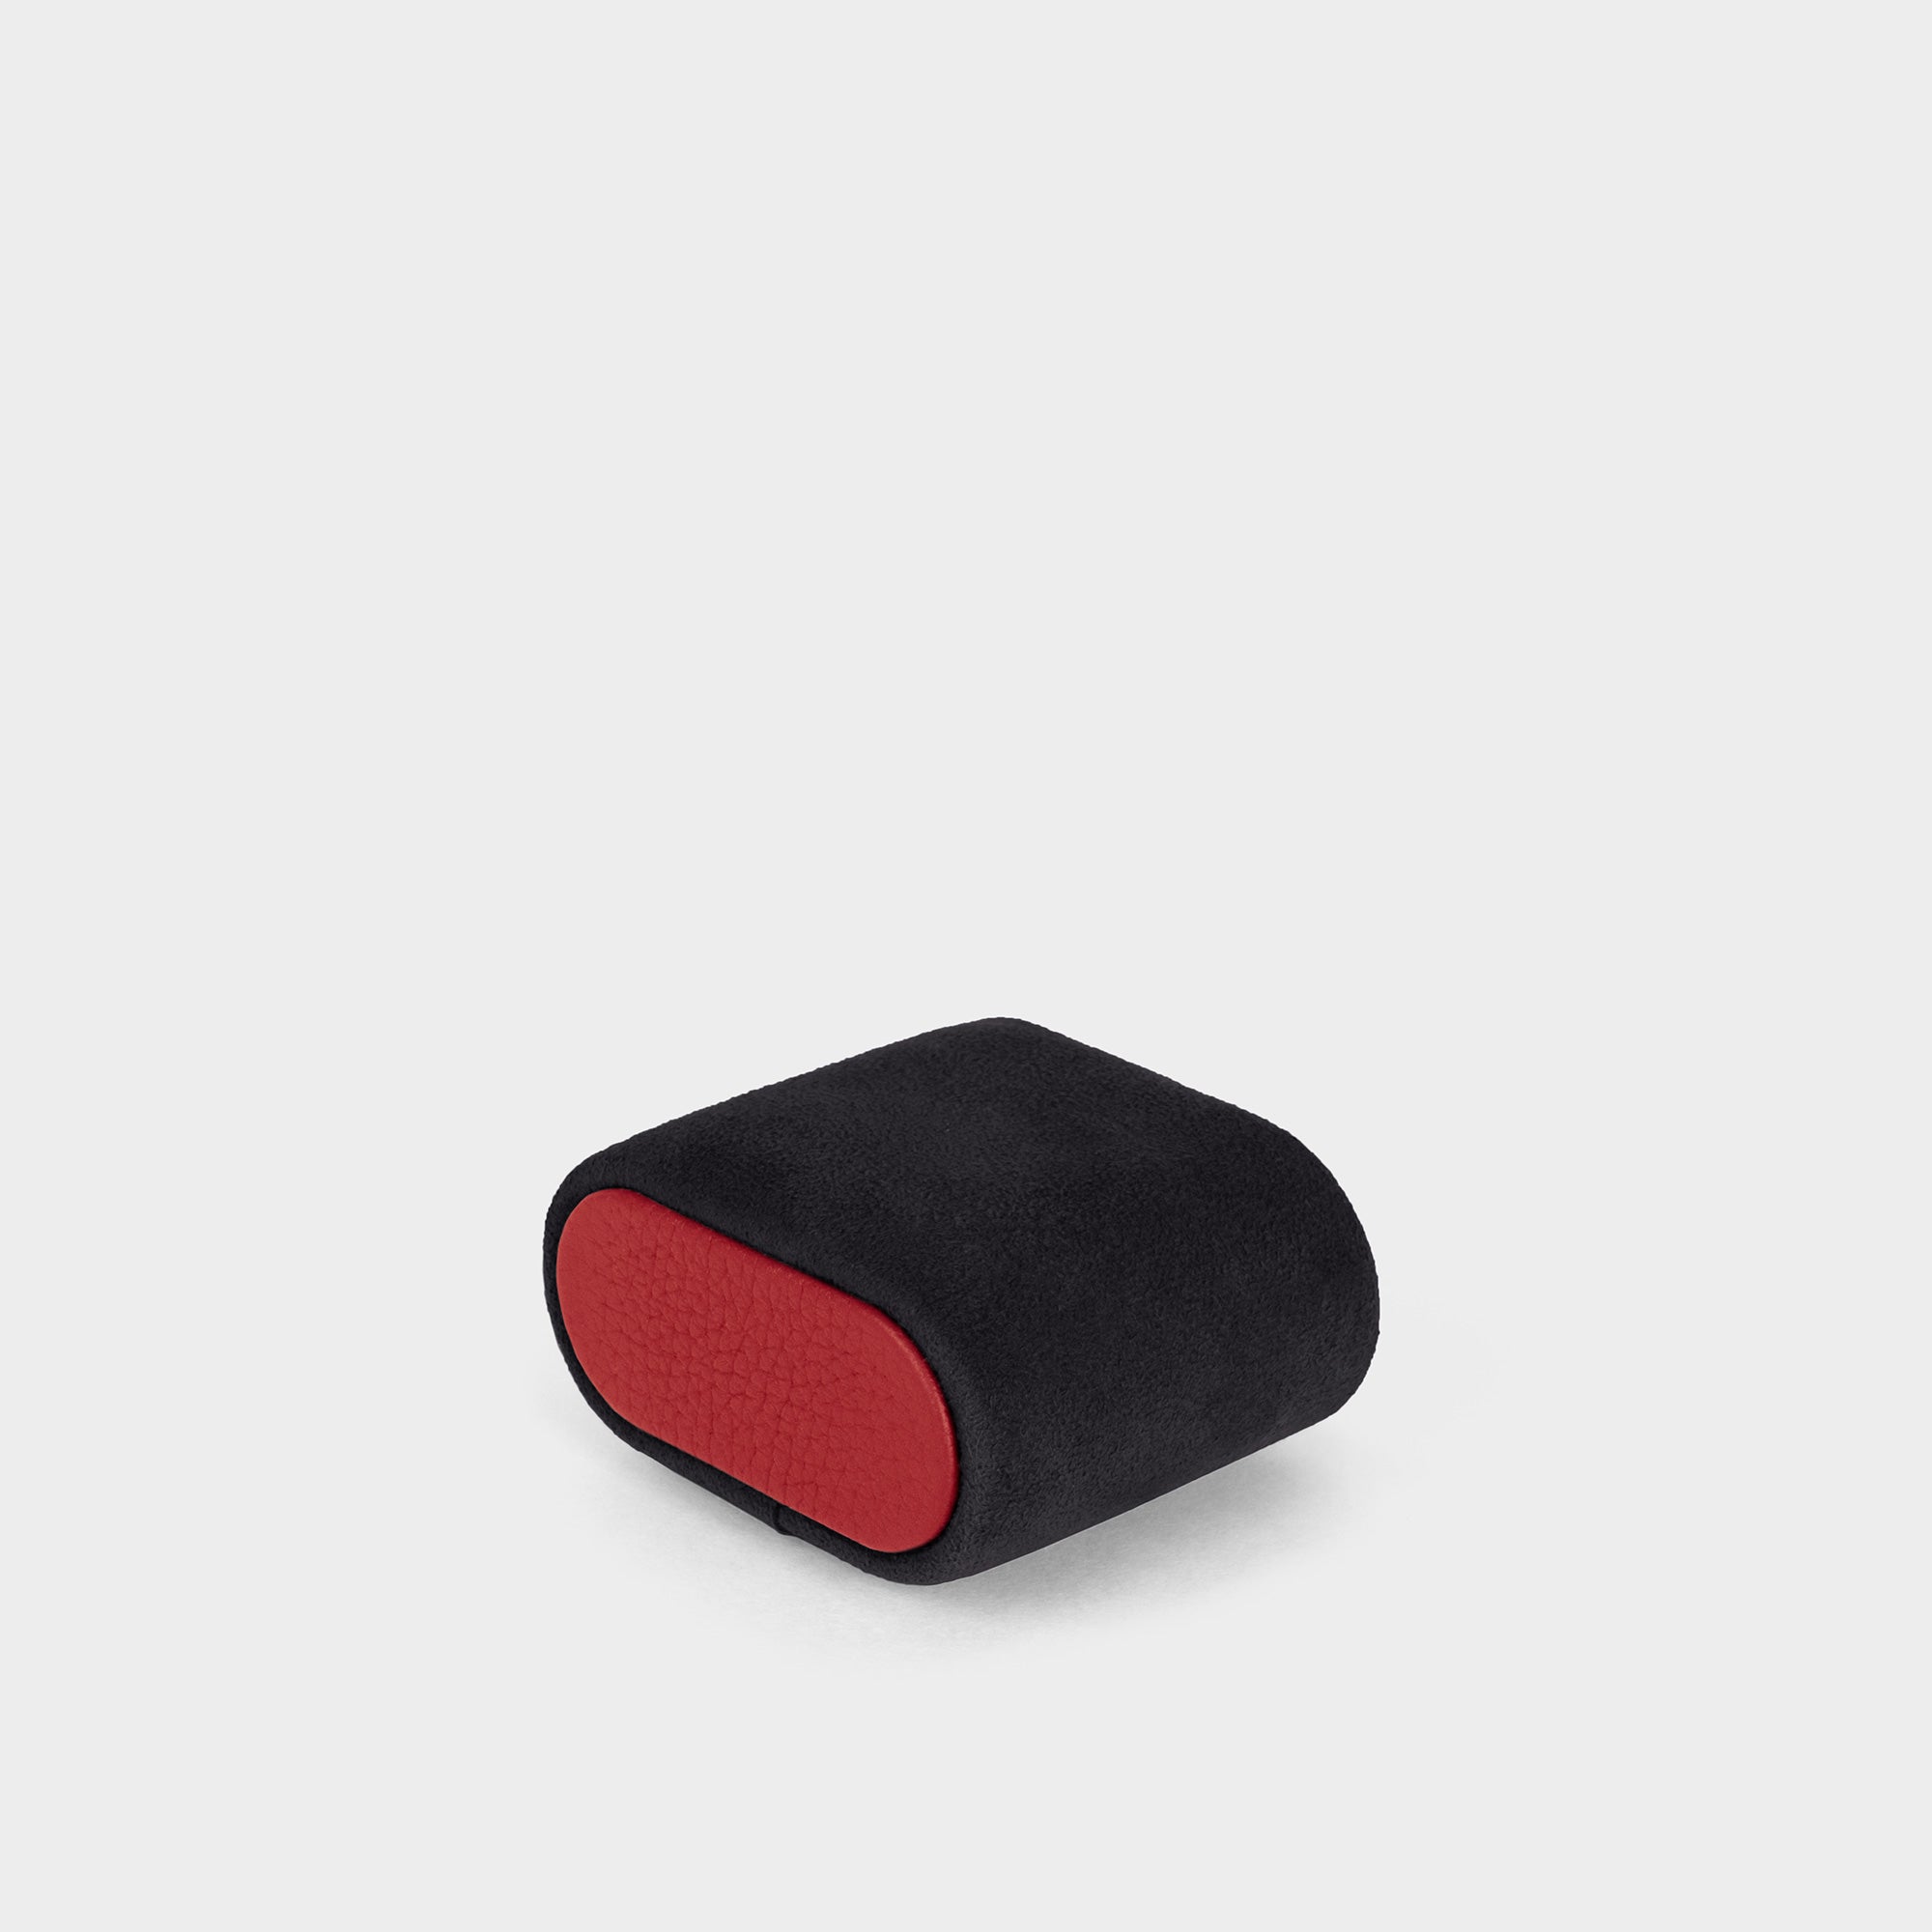 Soft Alcantara removable watch cushion with bright red contrasting sides